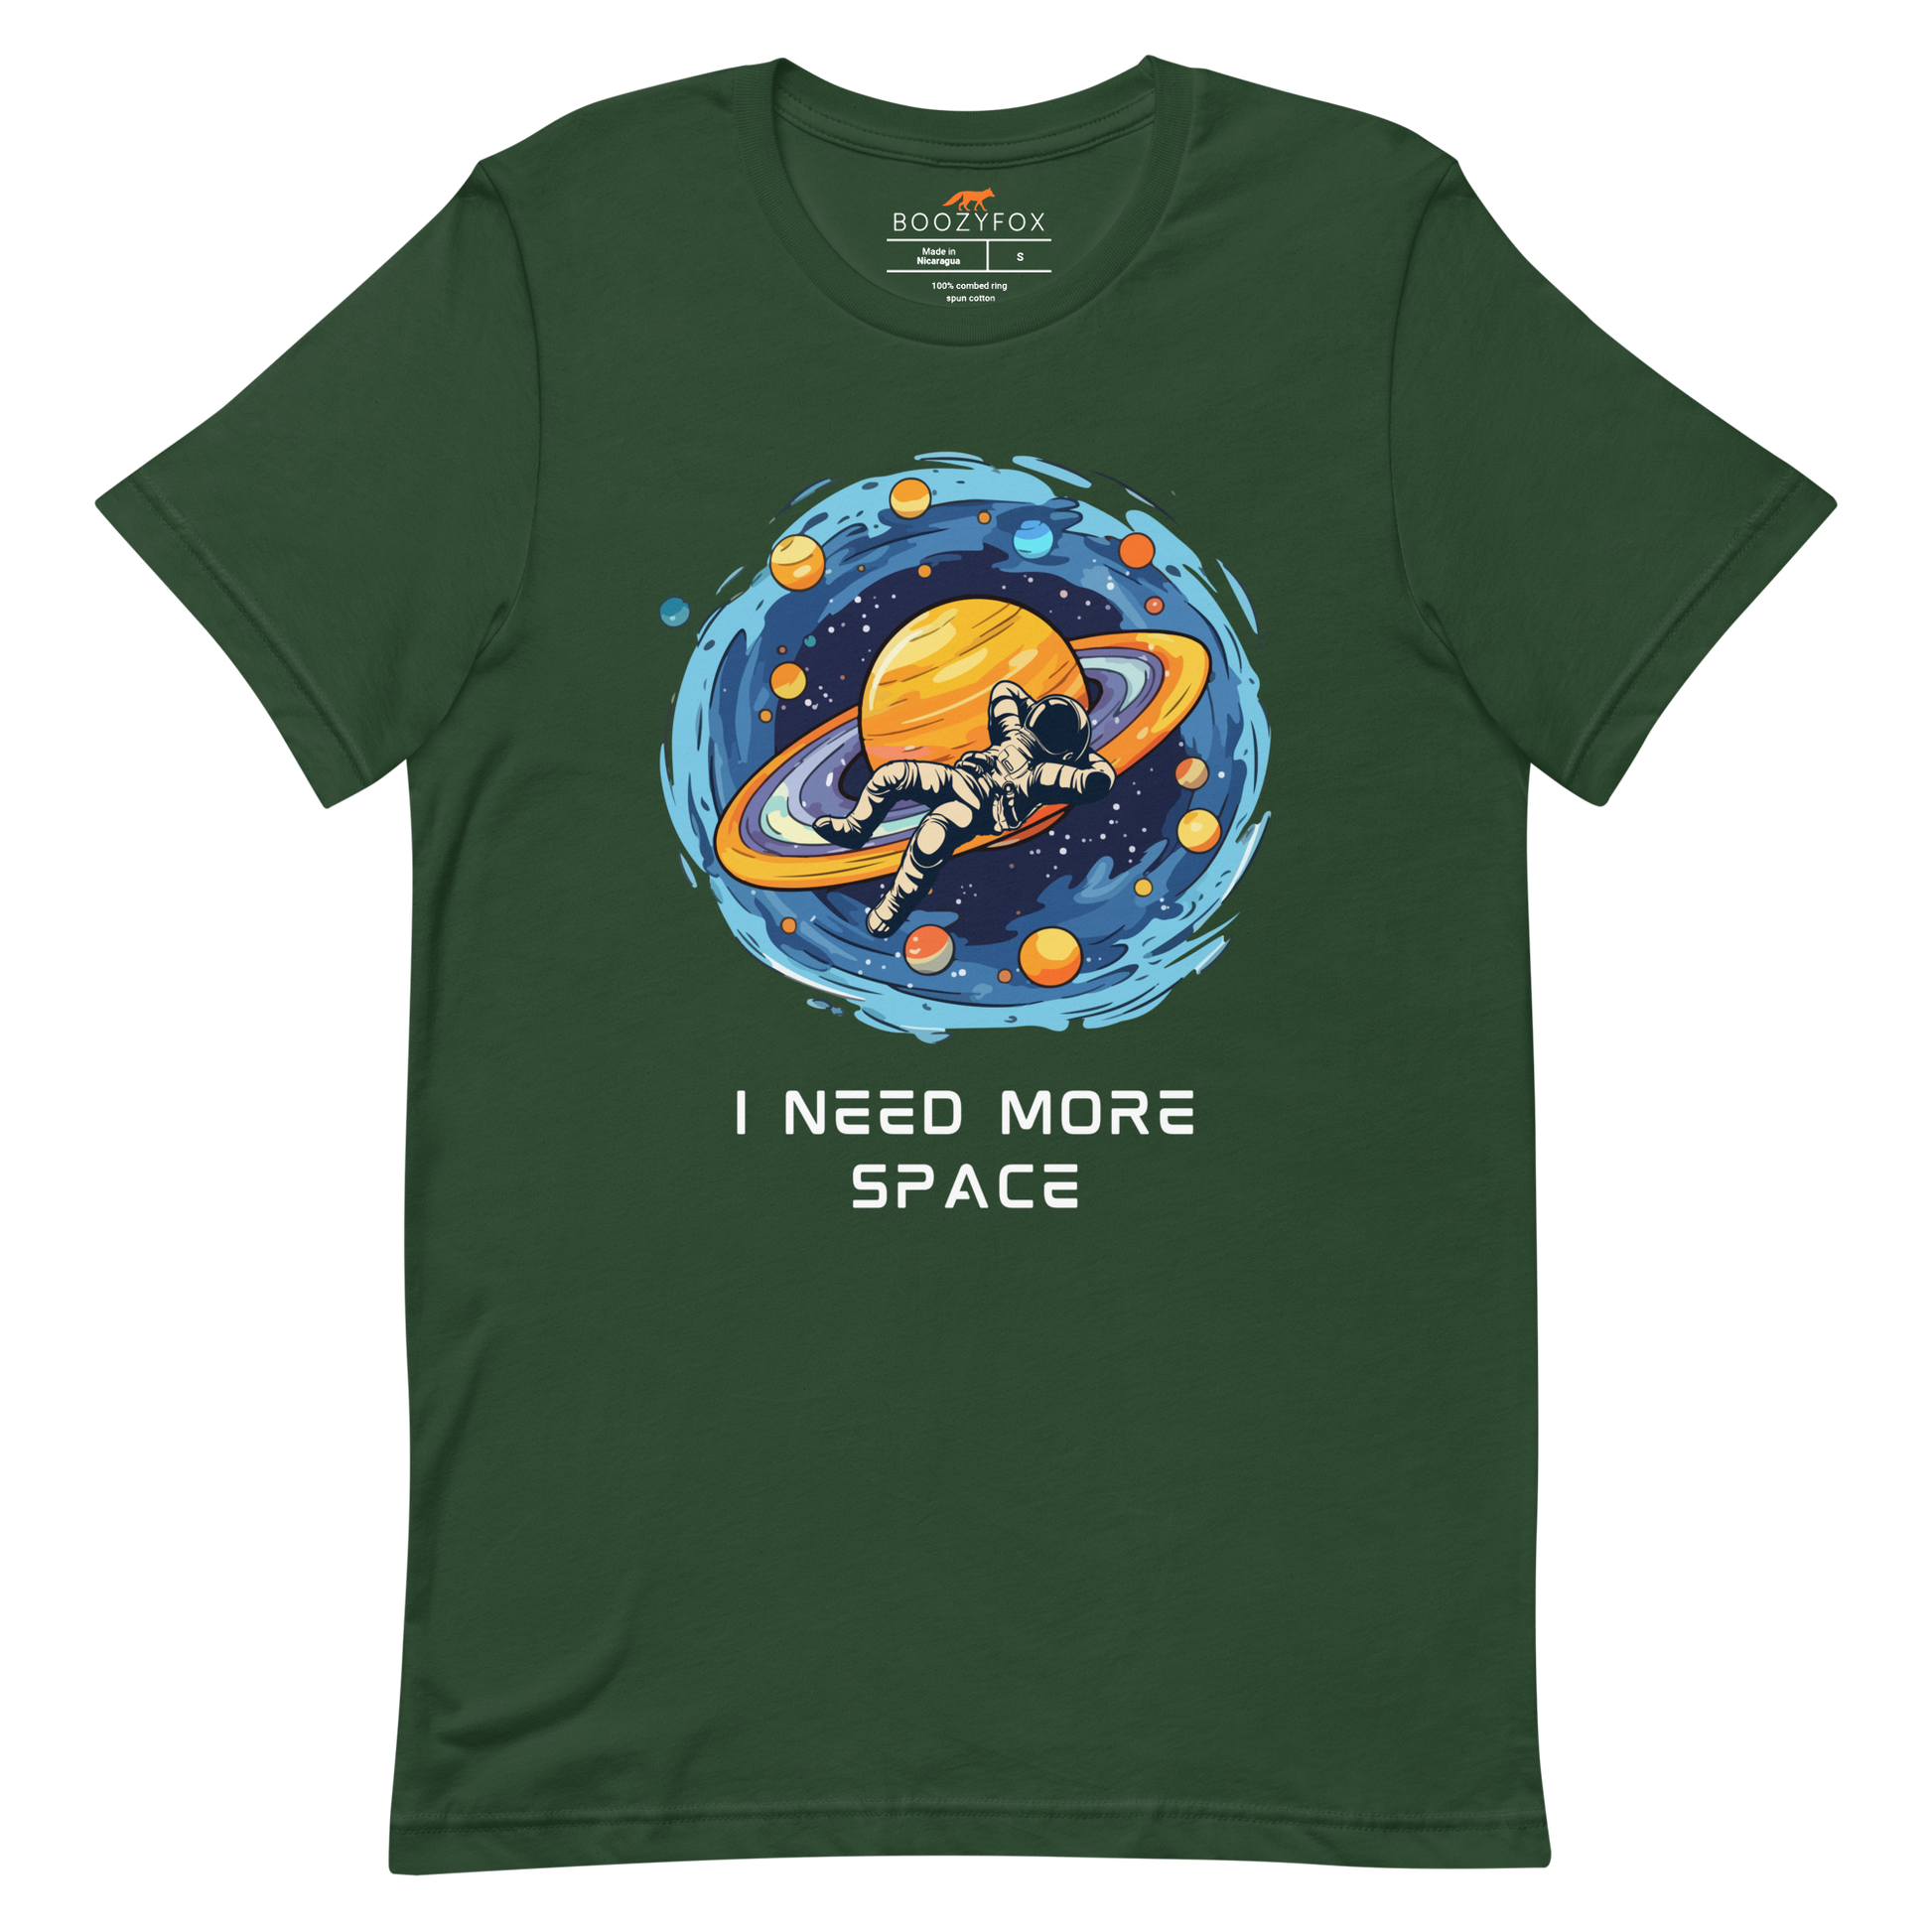 Forest Green Premium Astronaut Tee featuring a captivating I Need More Space graphic on the chest - Funny Graphic Space Tees - Boozy Fox